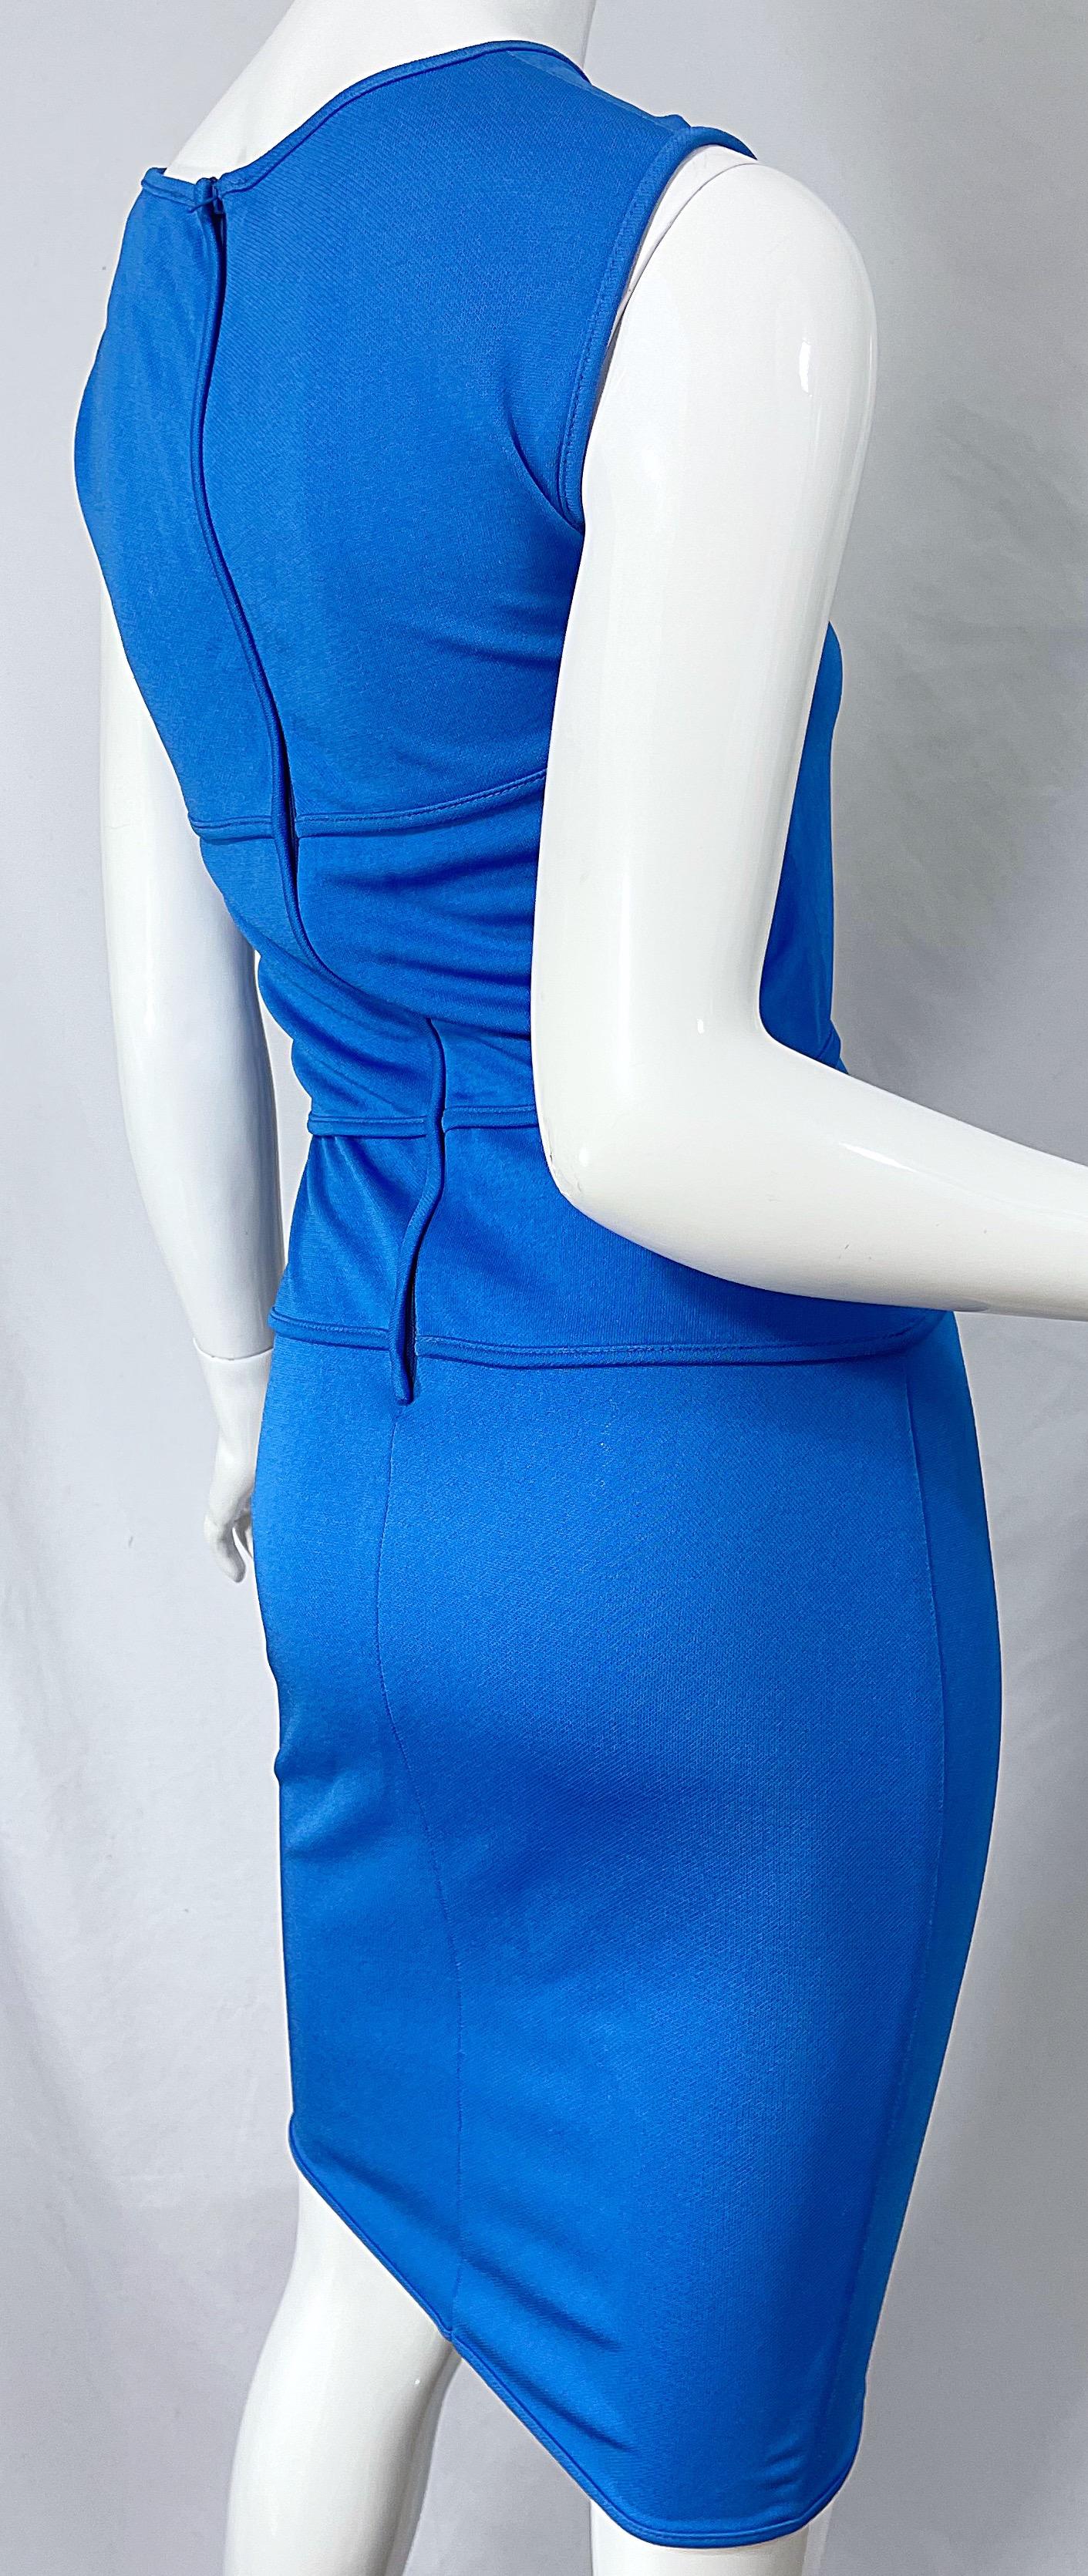 Thierry Mugler 1990s Blue Cut Out Vintage Body Con 90s Dress Size 44 / 6 - 8 For Sale 2